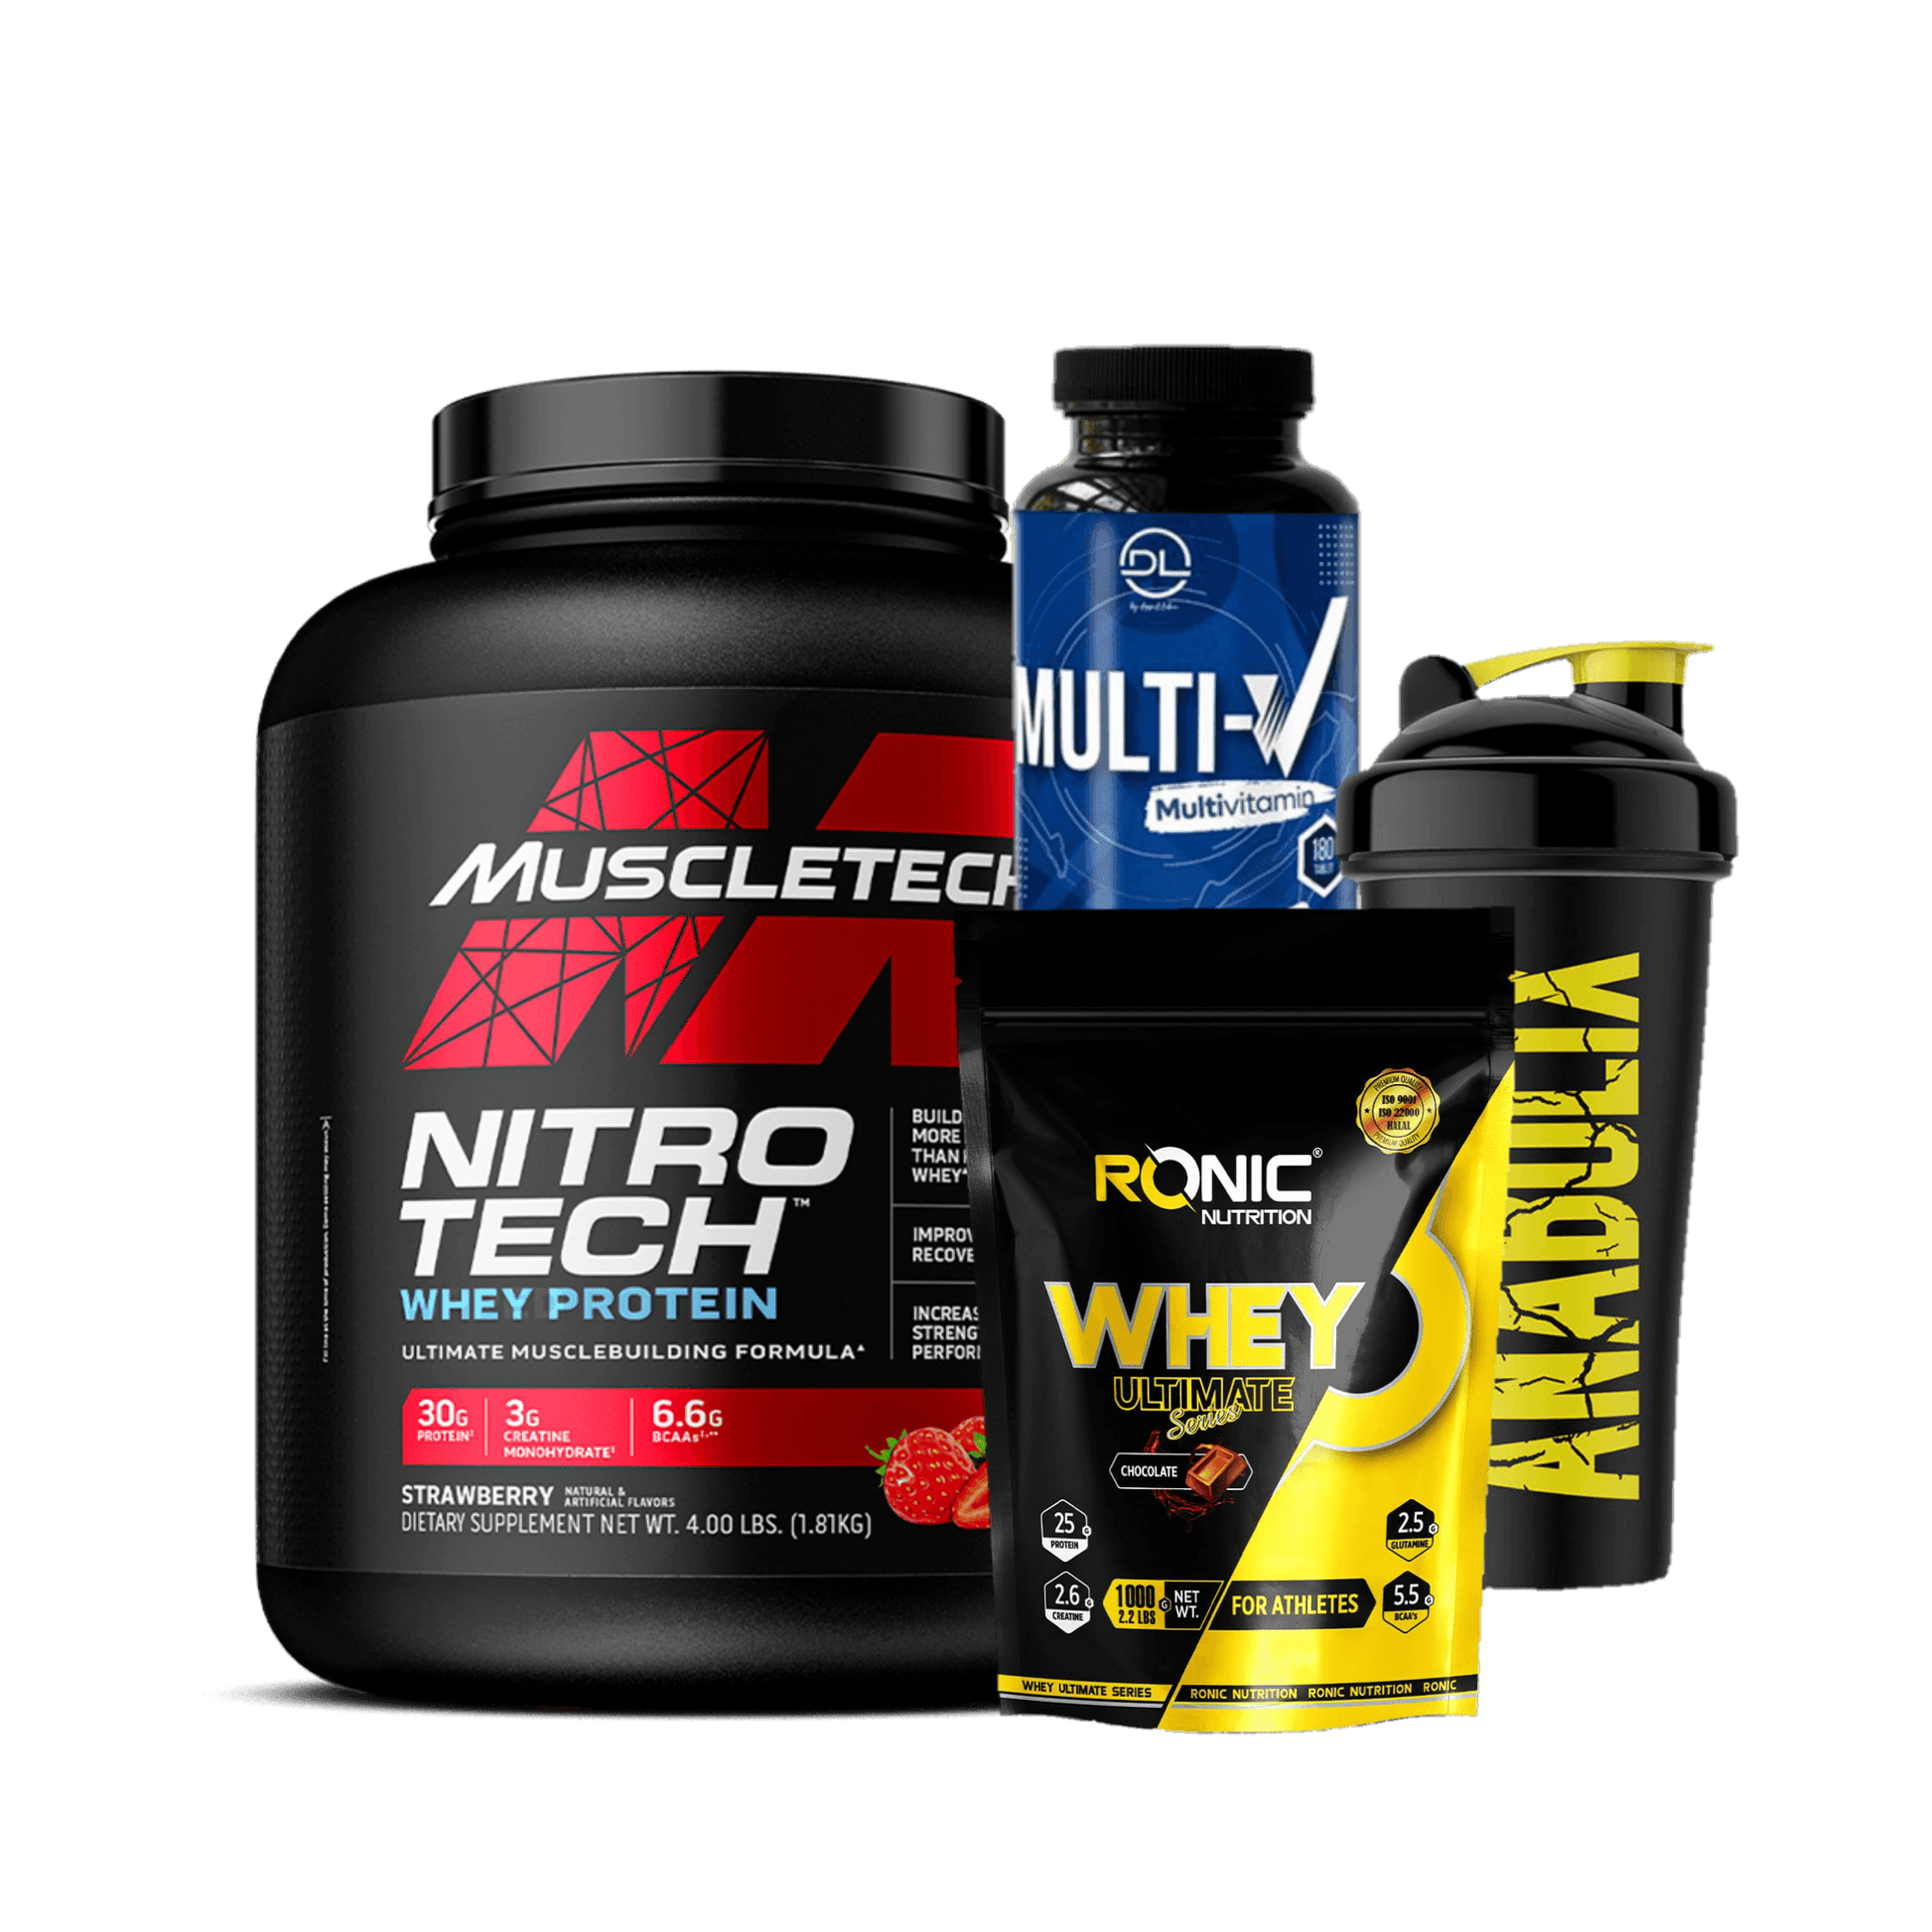 Nitrotech + Ronic Whey + Multi Vitamins + Shaker - The Supplements Factory